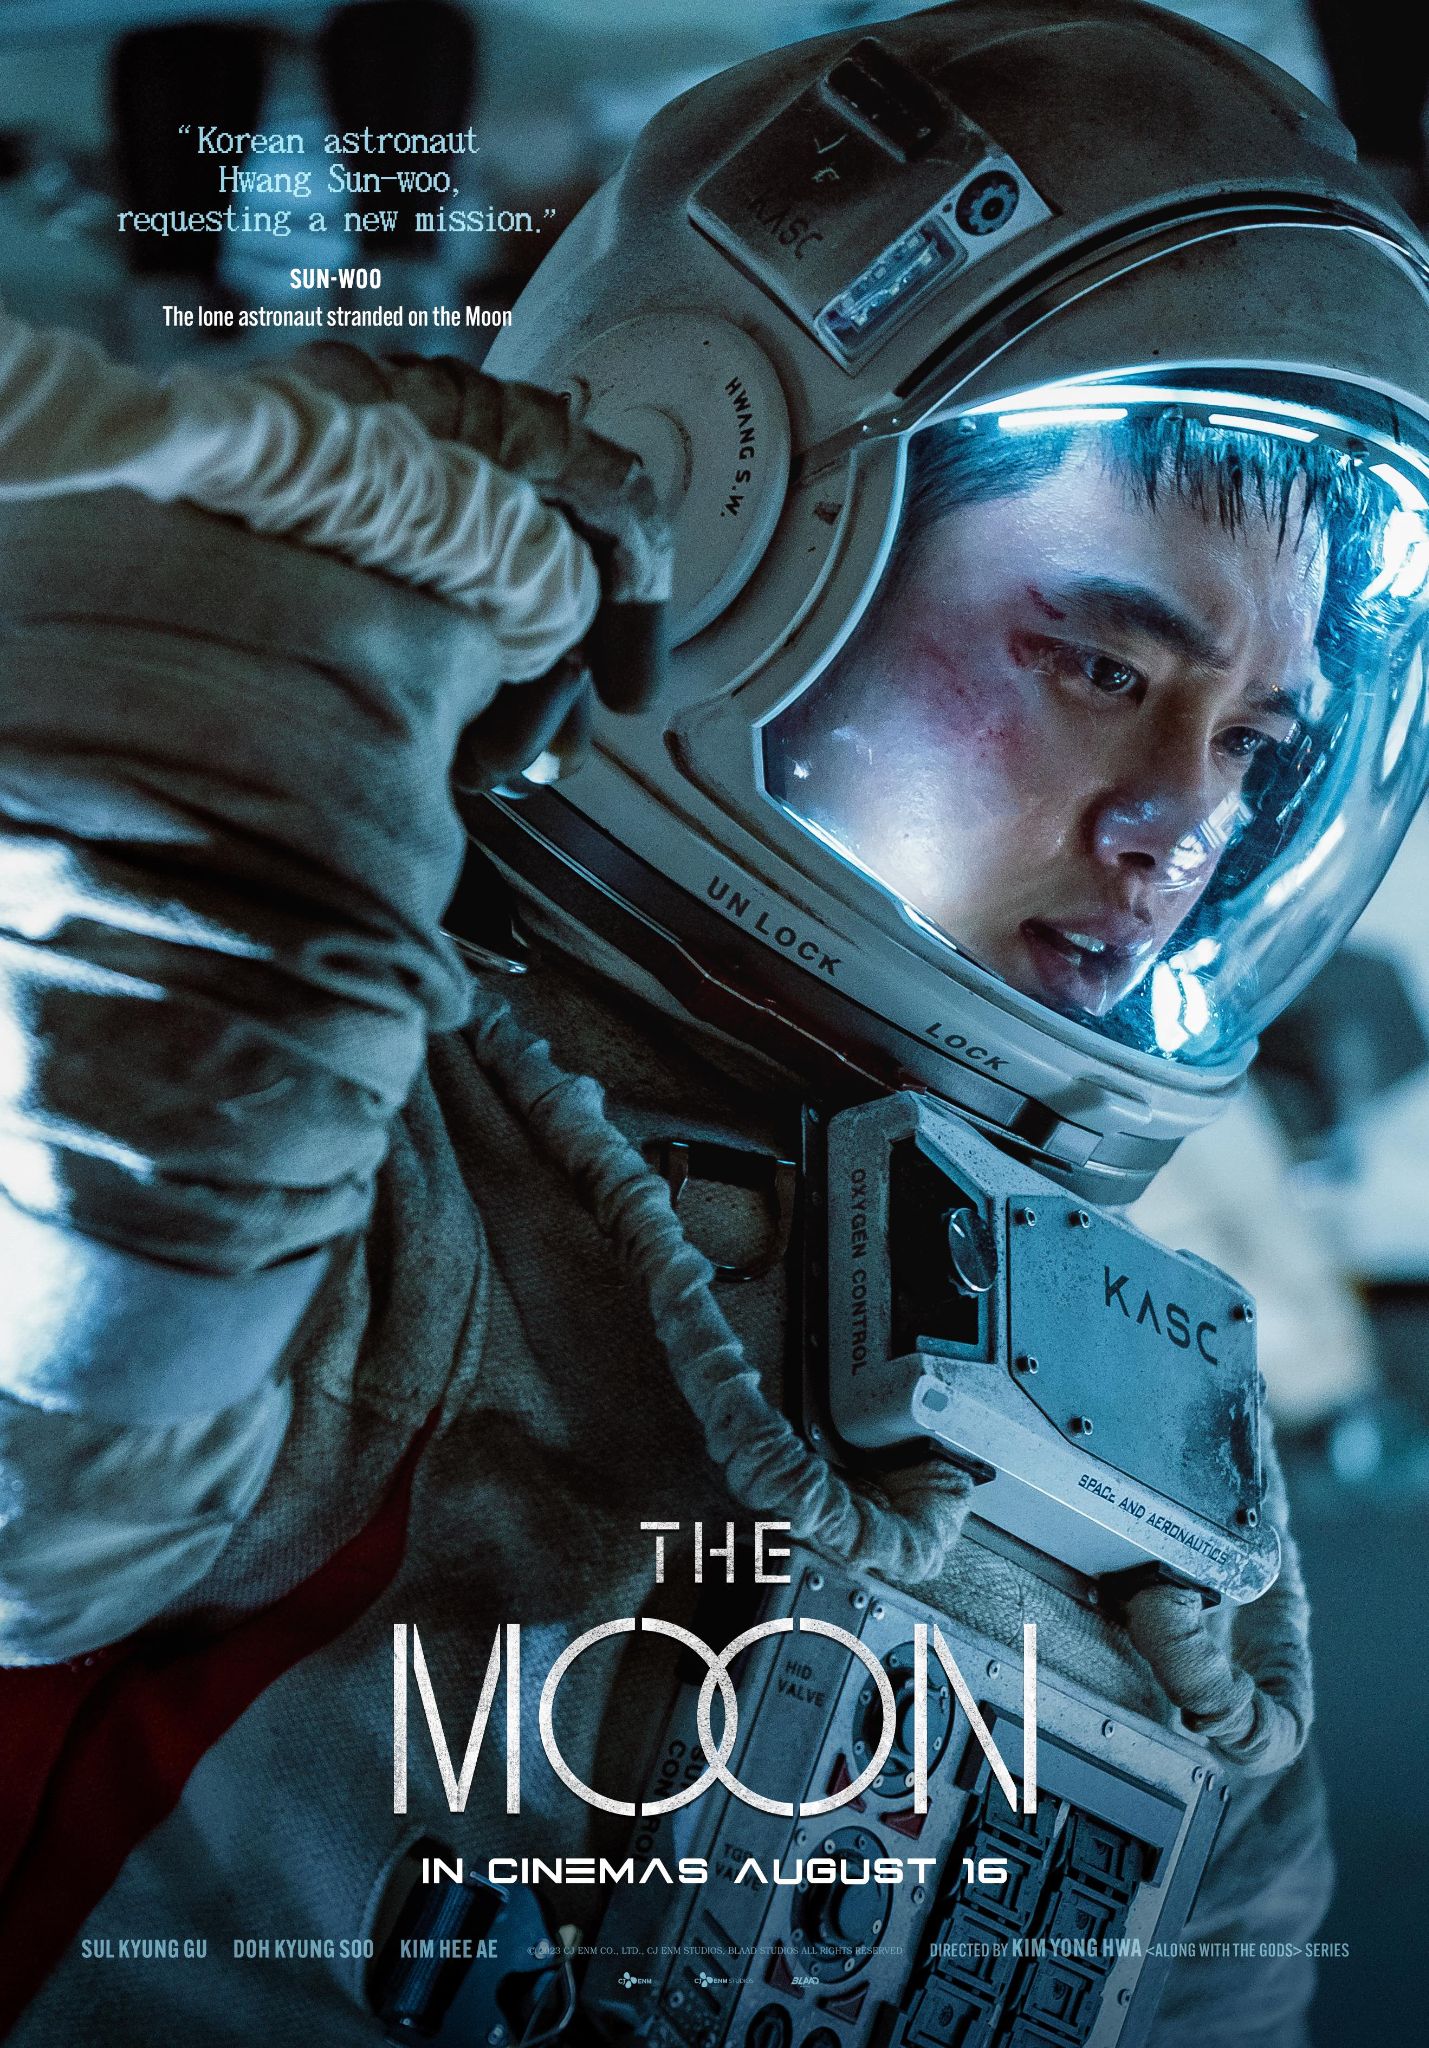 Less Than 1 Month from Launch. Korean Space Thriller “THE MOON” Comes Out on August 16